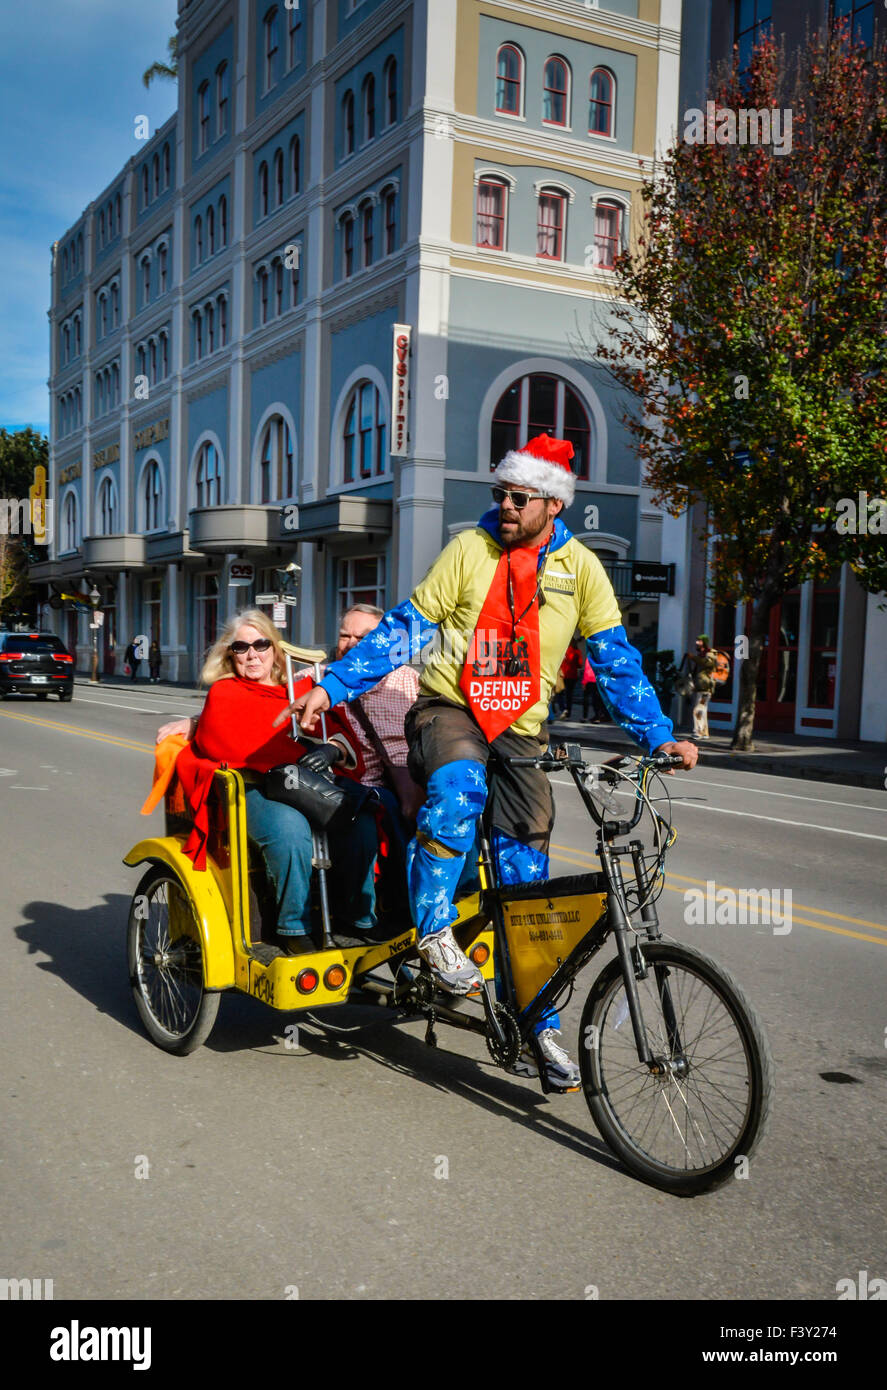 Tourists celebrating the holidays enjoy a pedicab ride by a Santa hat wearing driver in the French Quarter in New Orleans, LA Stock Photo